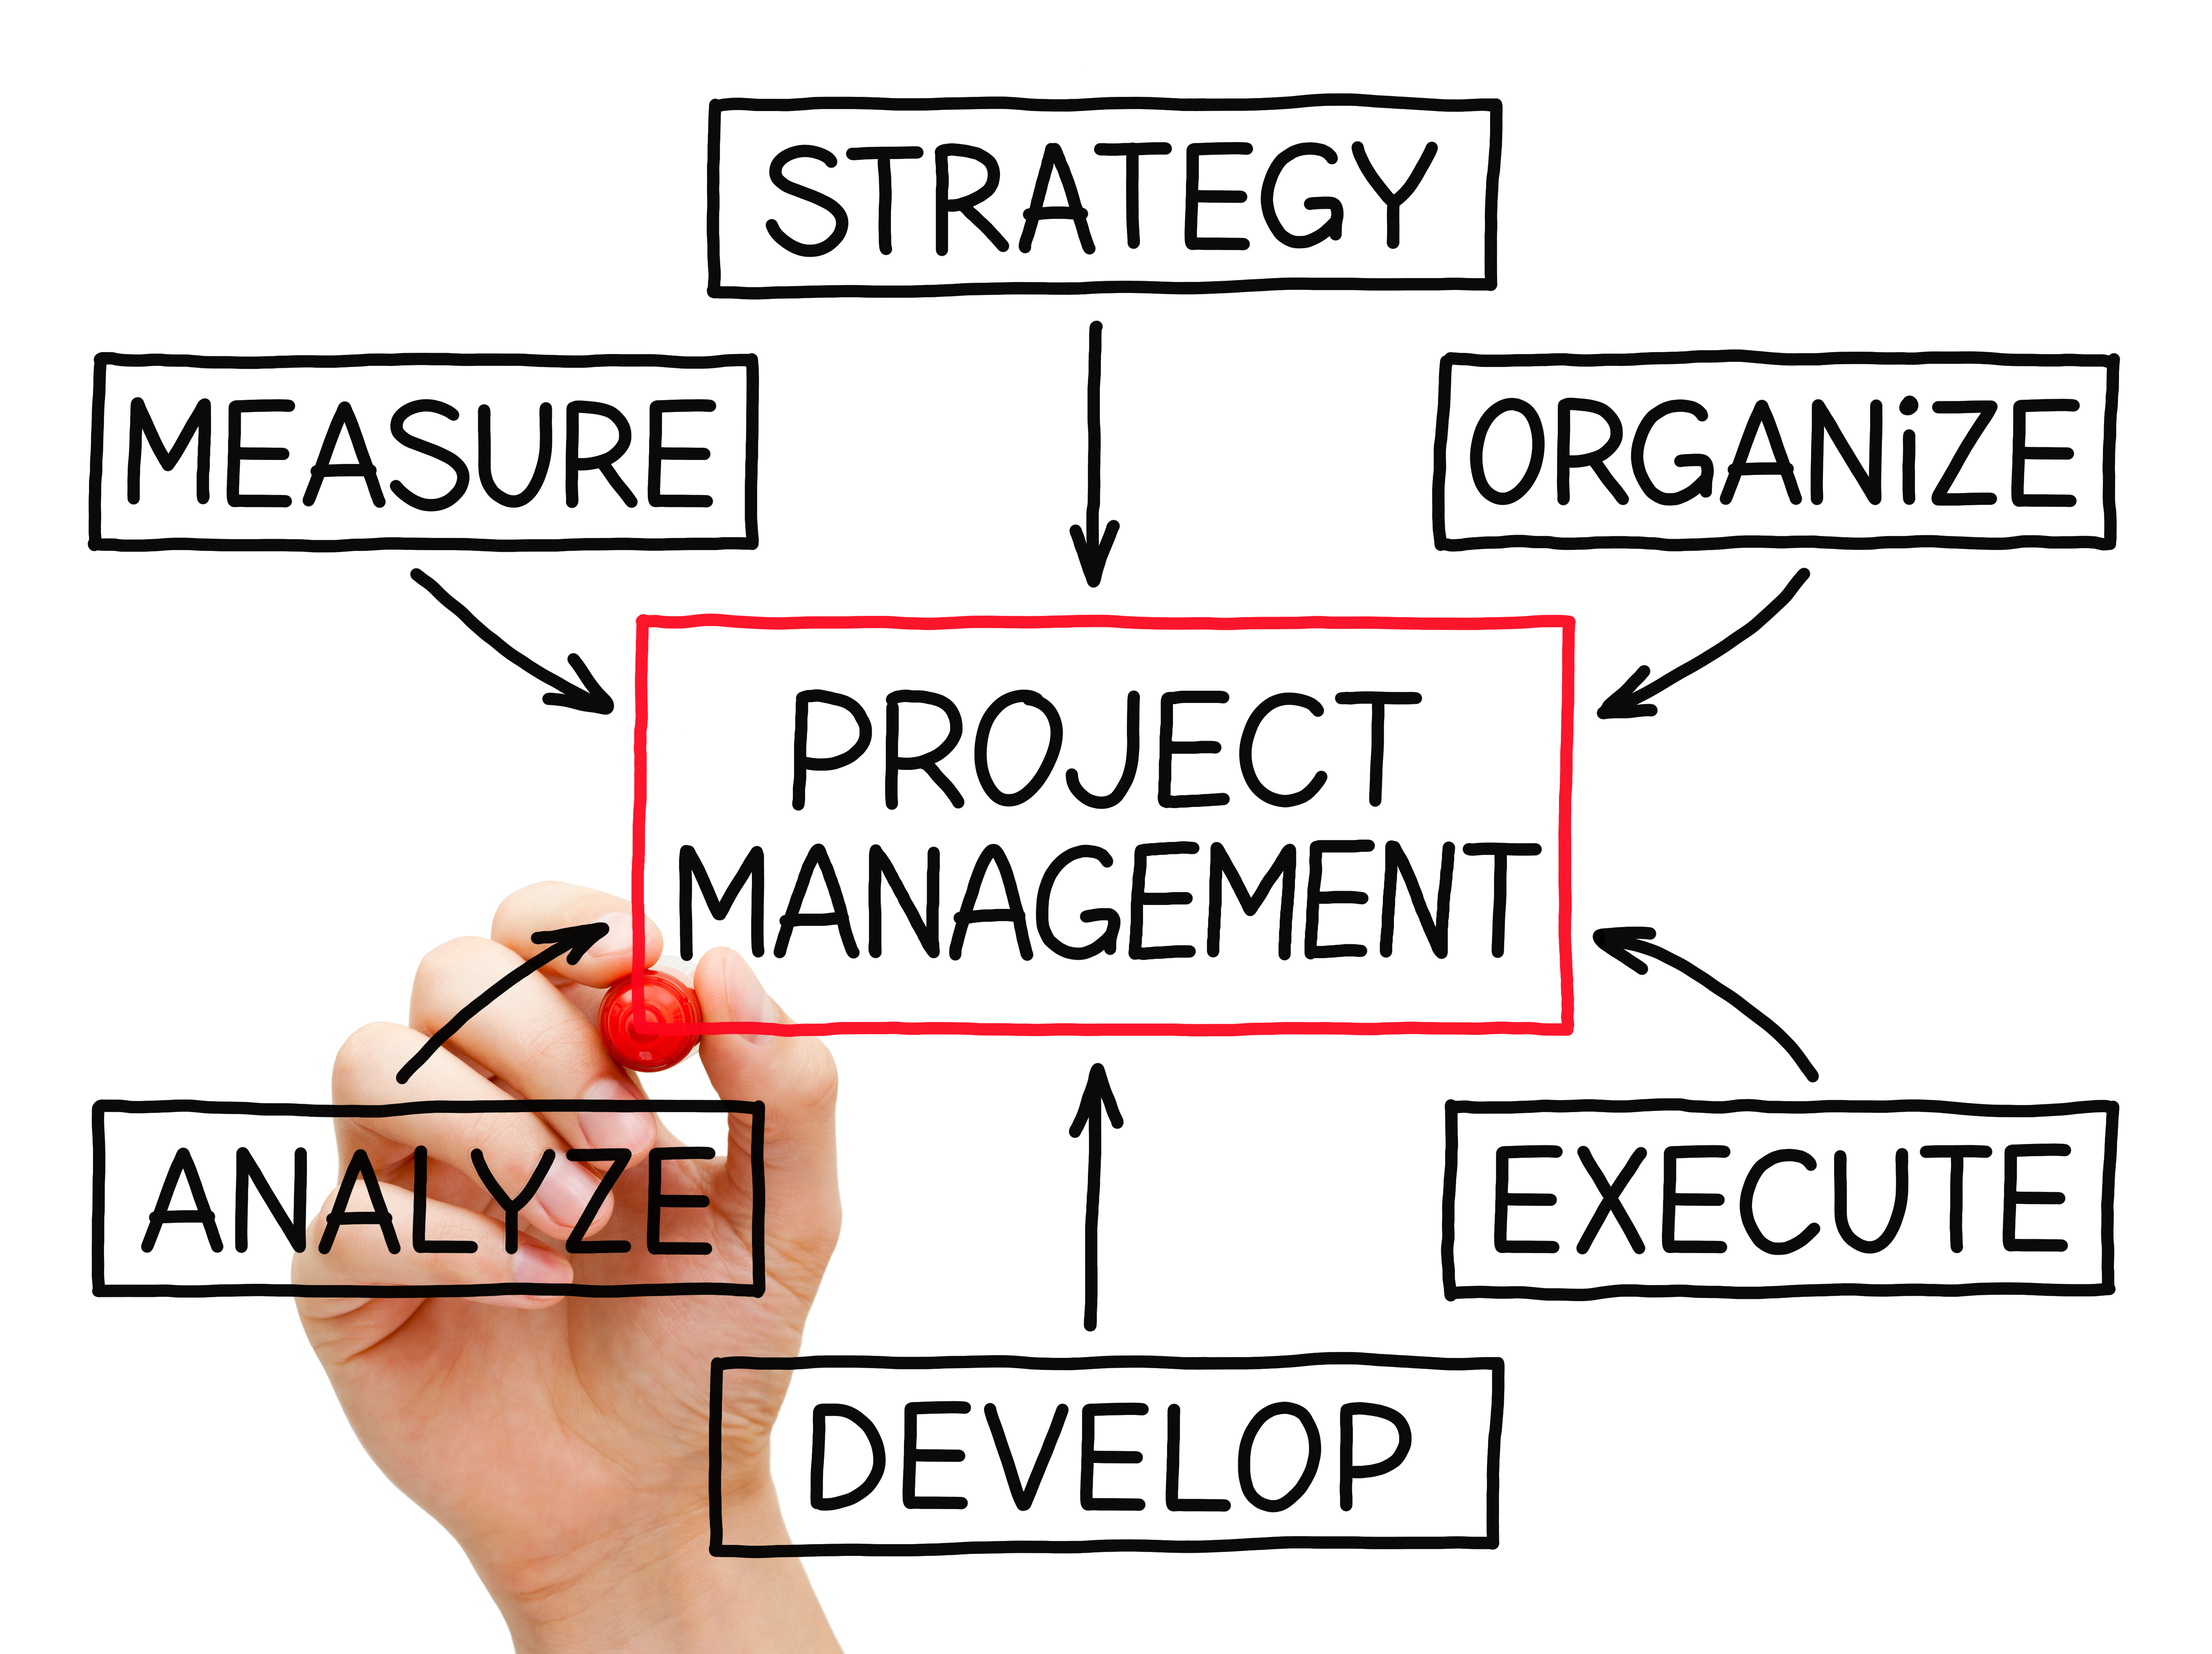 Project Management: Was My Project A Success? Why?